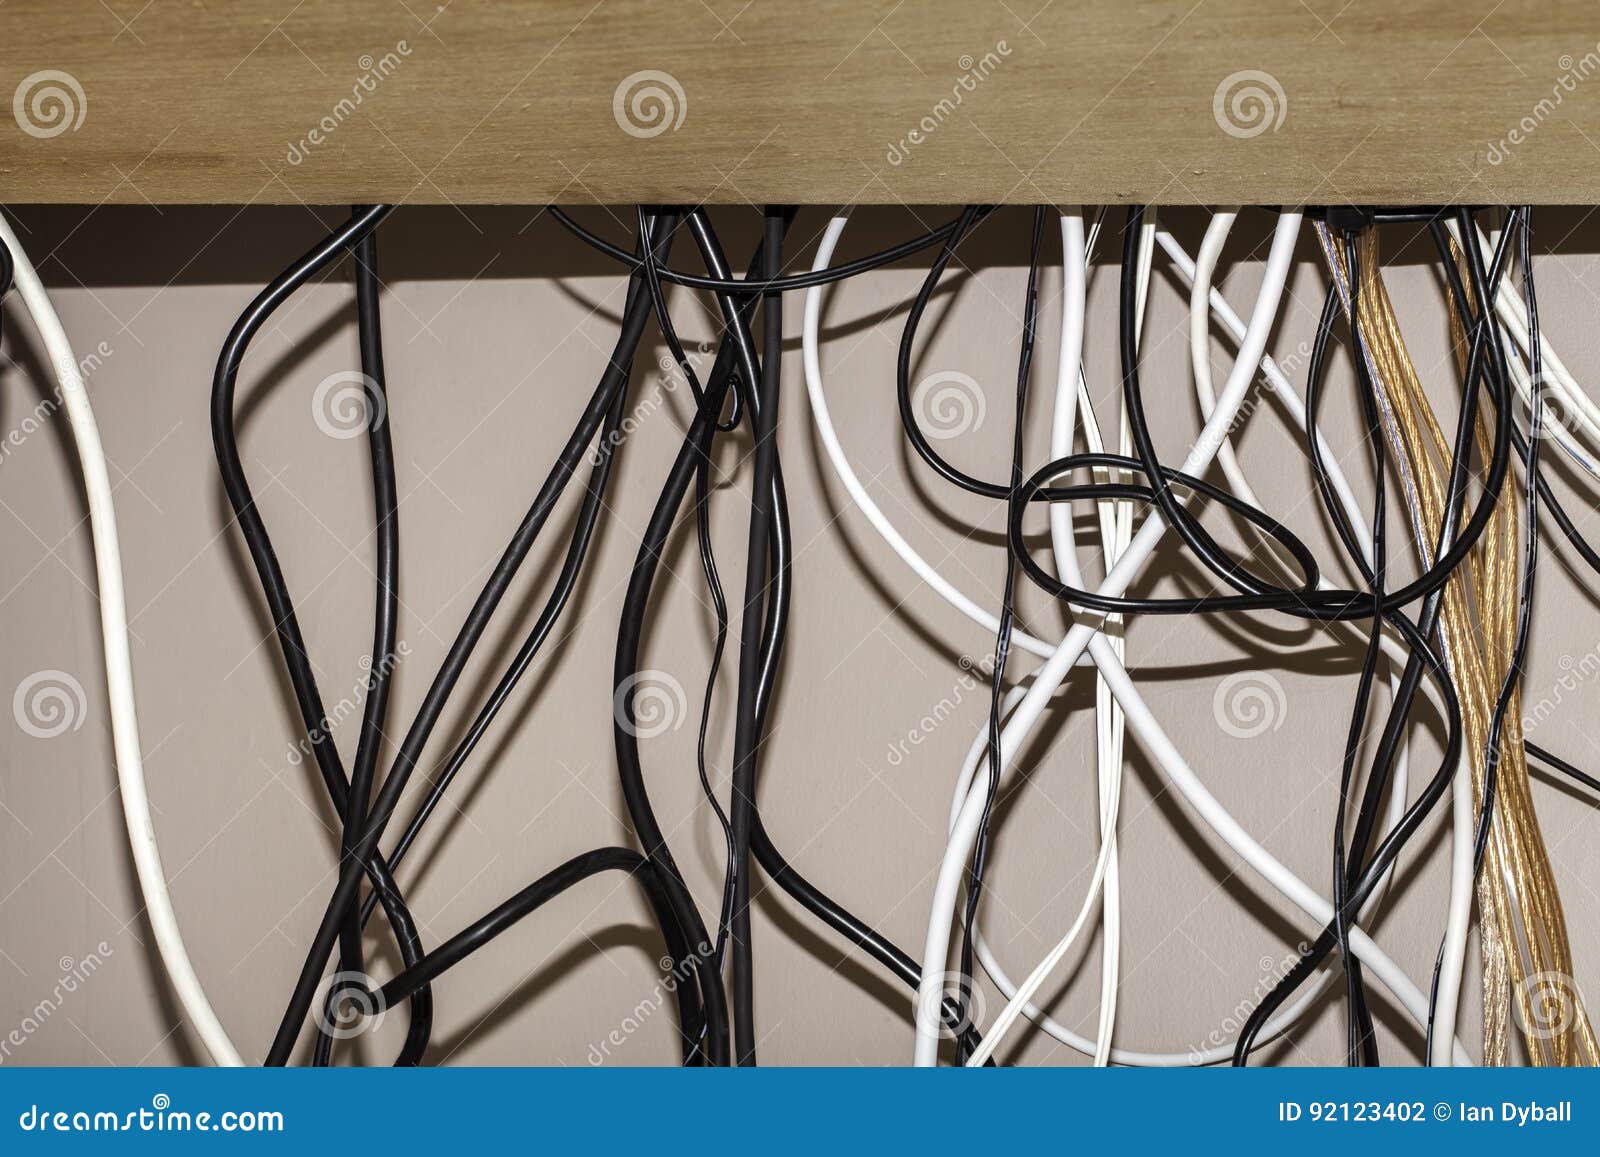 untidy cables hanging behind a computer desk